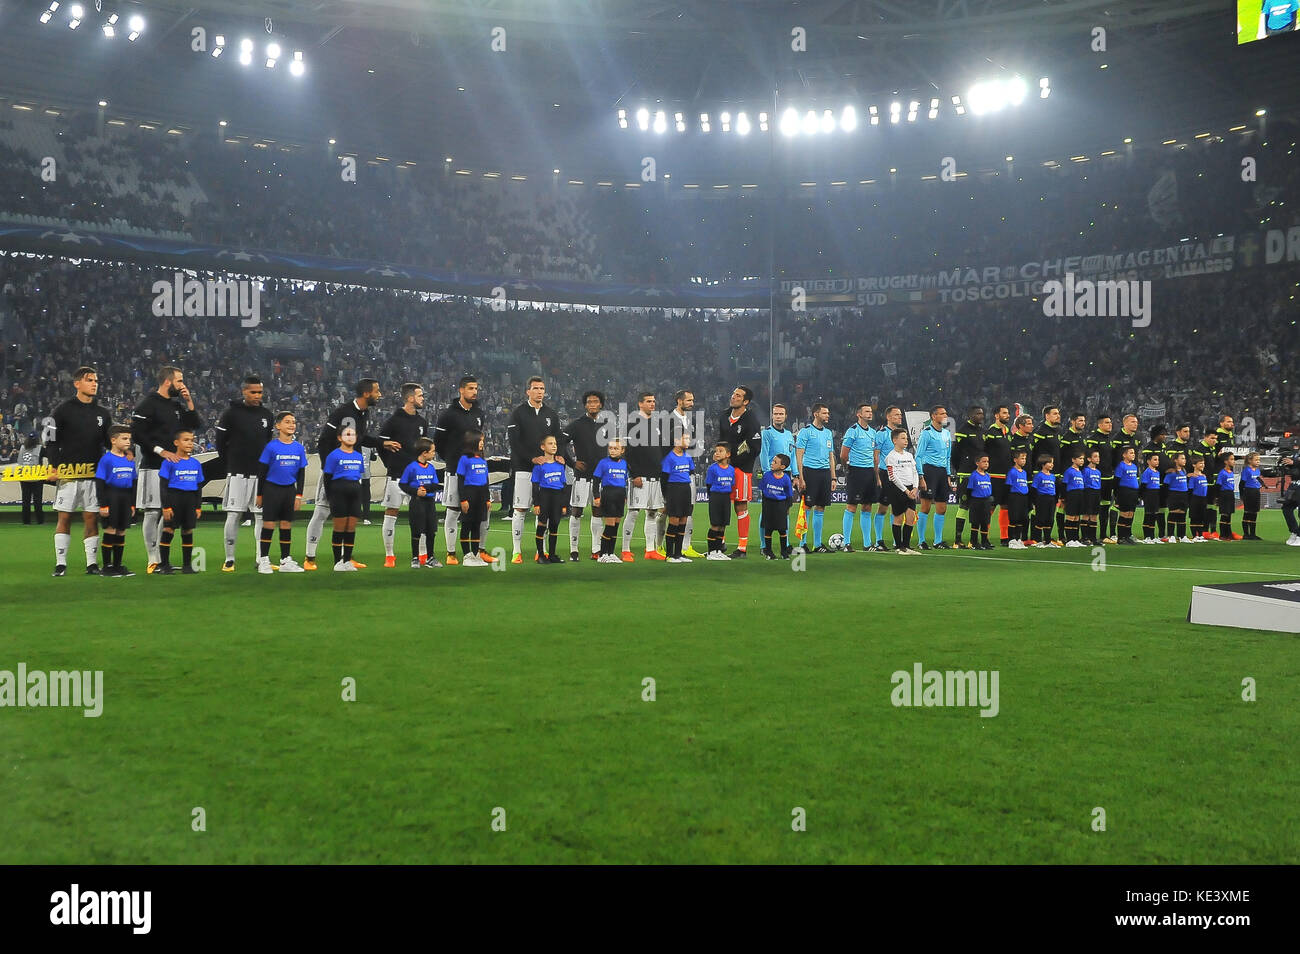 Turin, Italy. 18th Oct, 2017. during the UEFA Champions League football match between Juventus FC and Sporting Lisbona at Allianz Stadium on 18 October, 2017 in Turin, Italy. Credit: FABIO PETROSINO/Alamy Live News Stock Photo